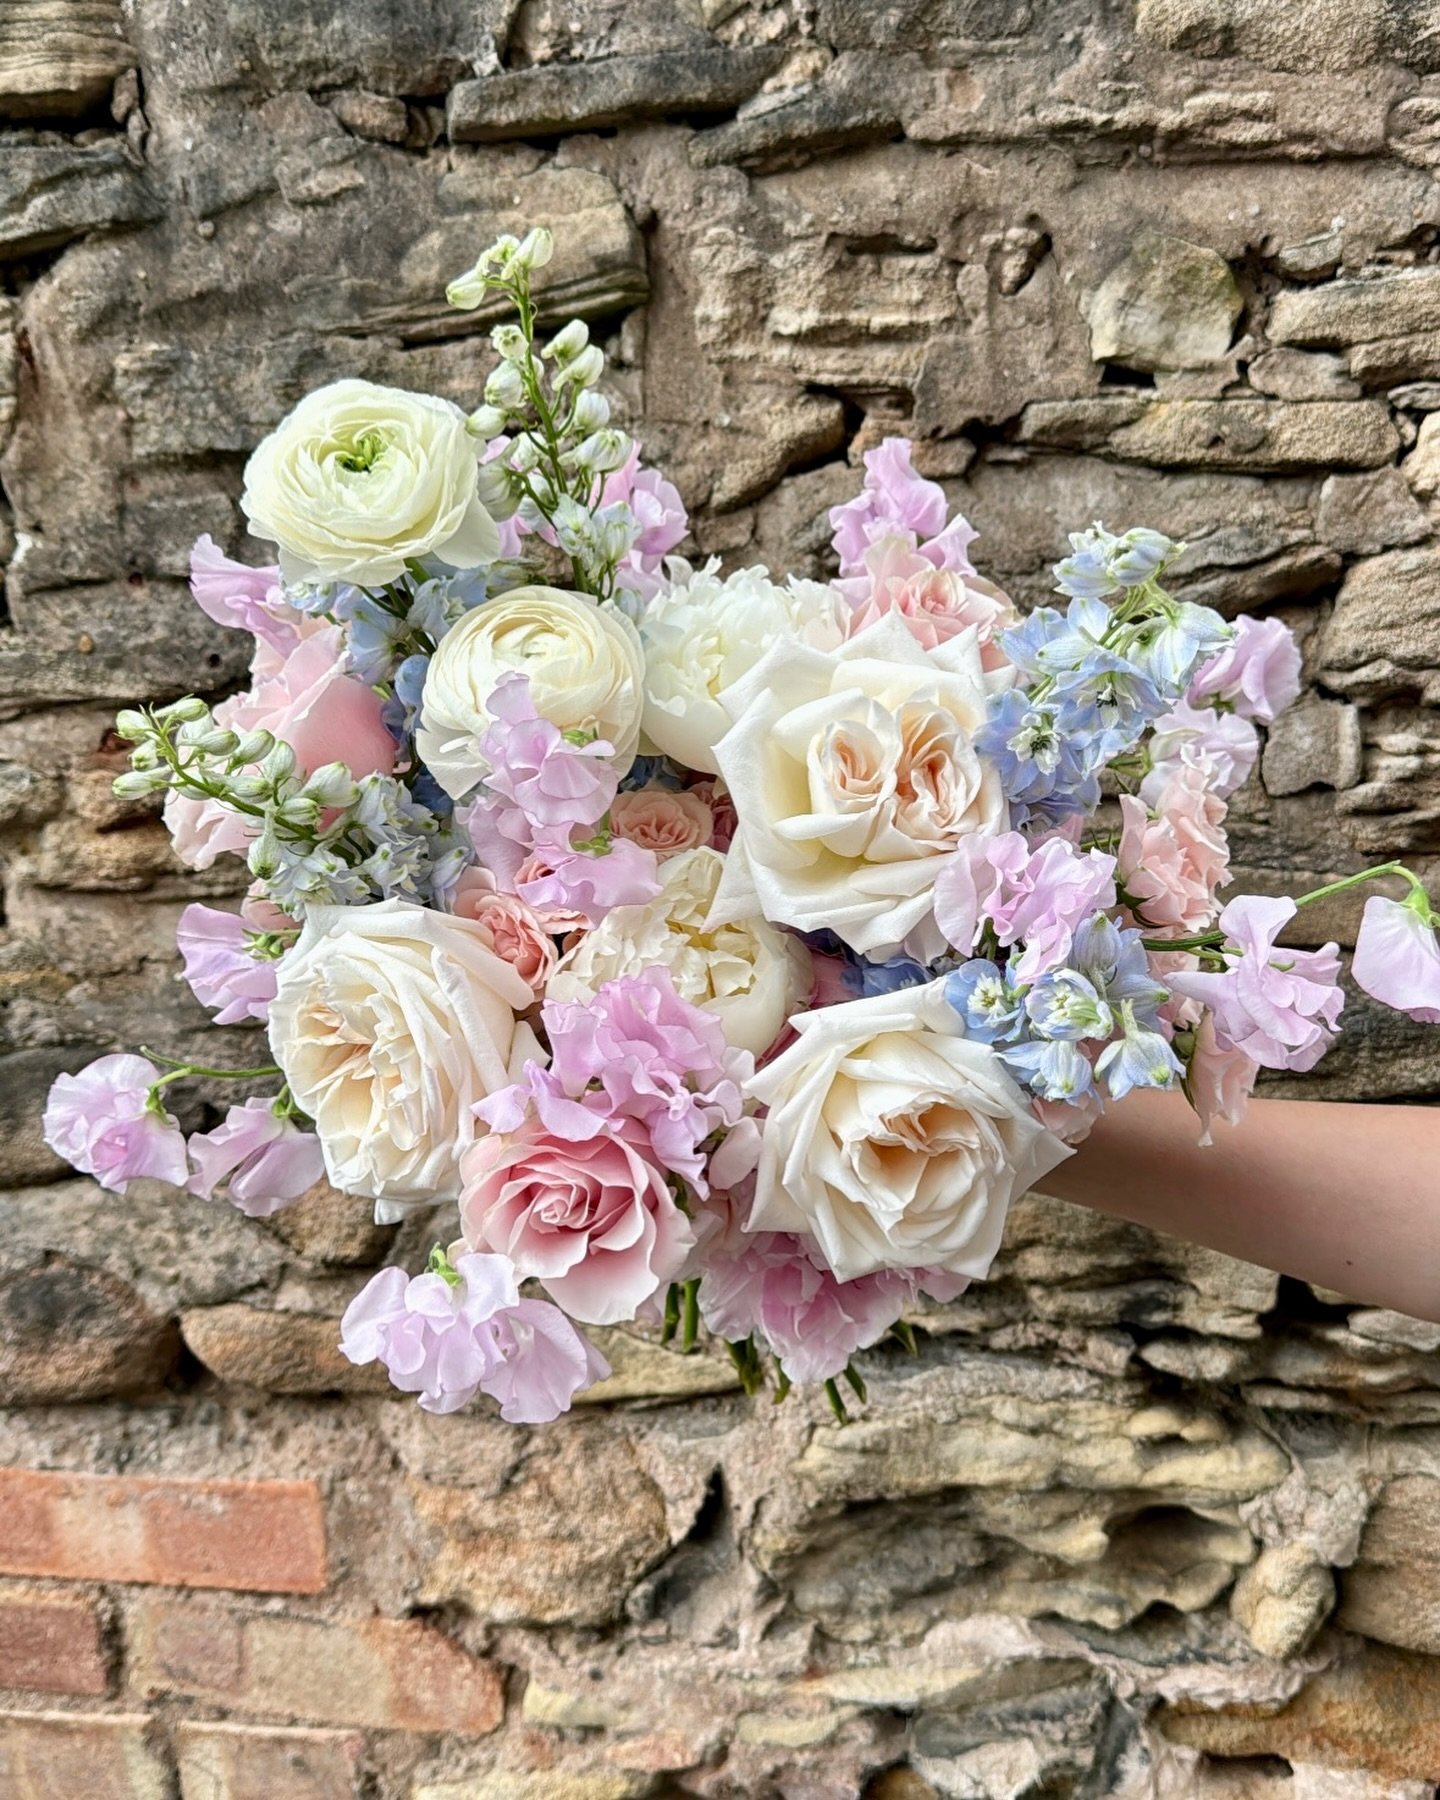 &ldquo;Hey! Bride and Groom here from yesterday&rsquo;s wedding you did the stunning flowers for! I can&rsquo;t even begin to tell you how amazing they were not to mention they smelt incredible as well! 

I never expected to get so many compliments o